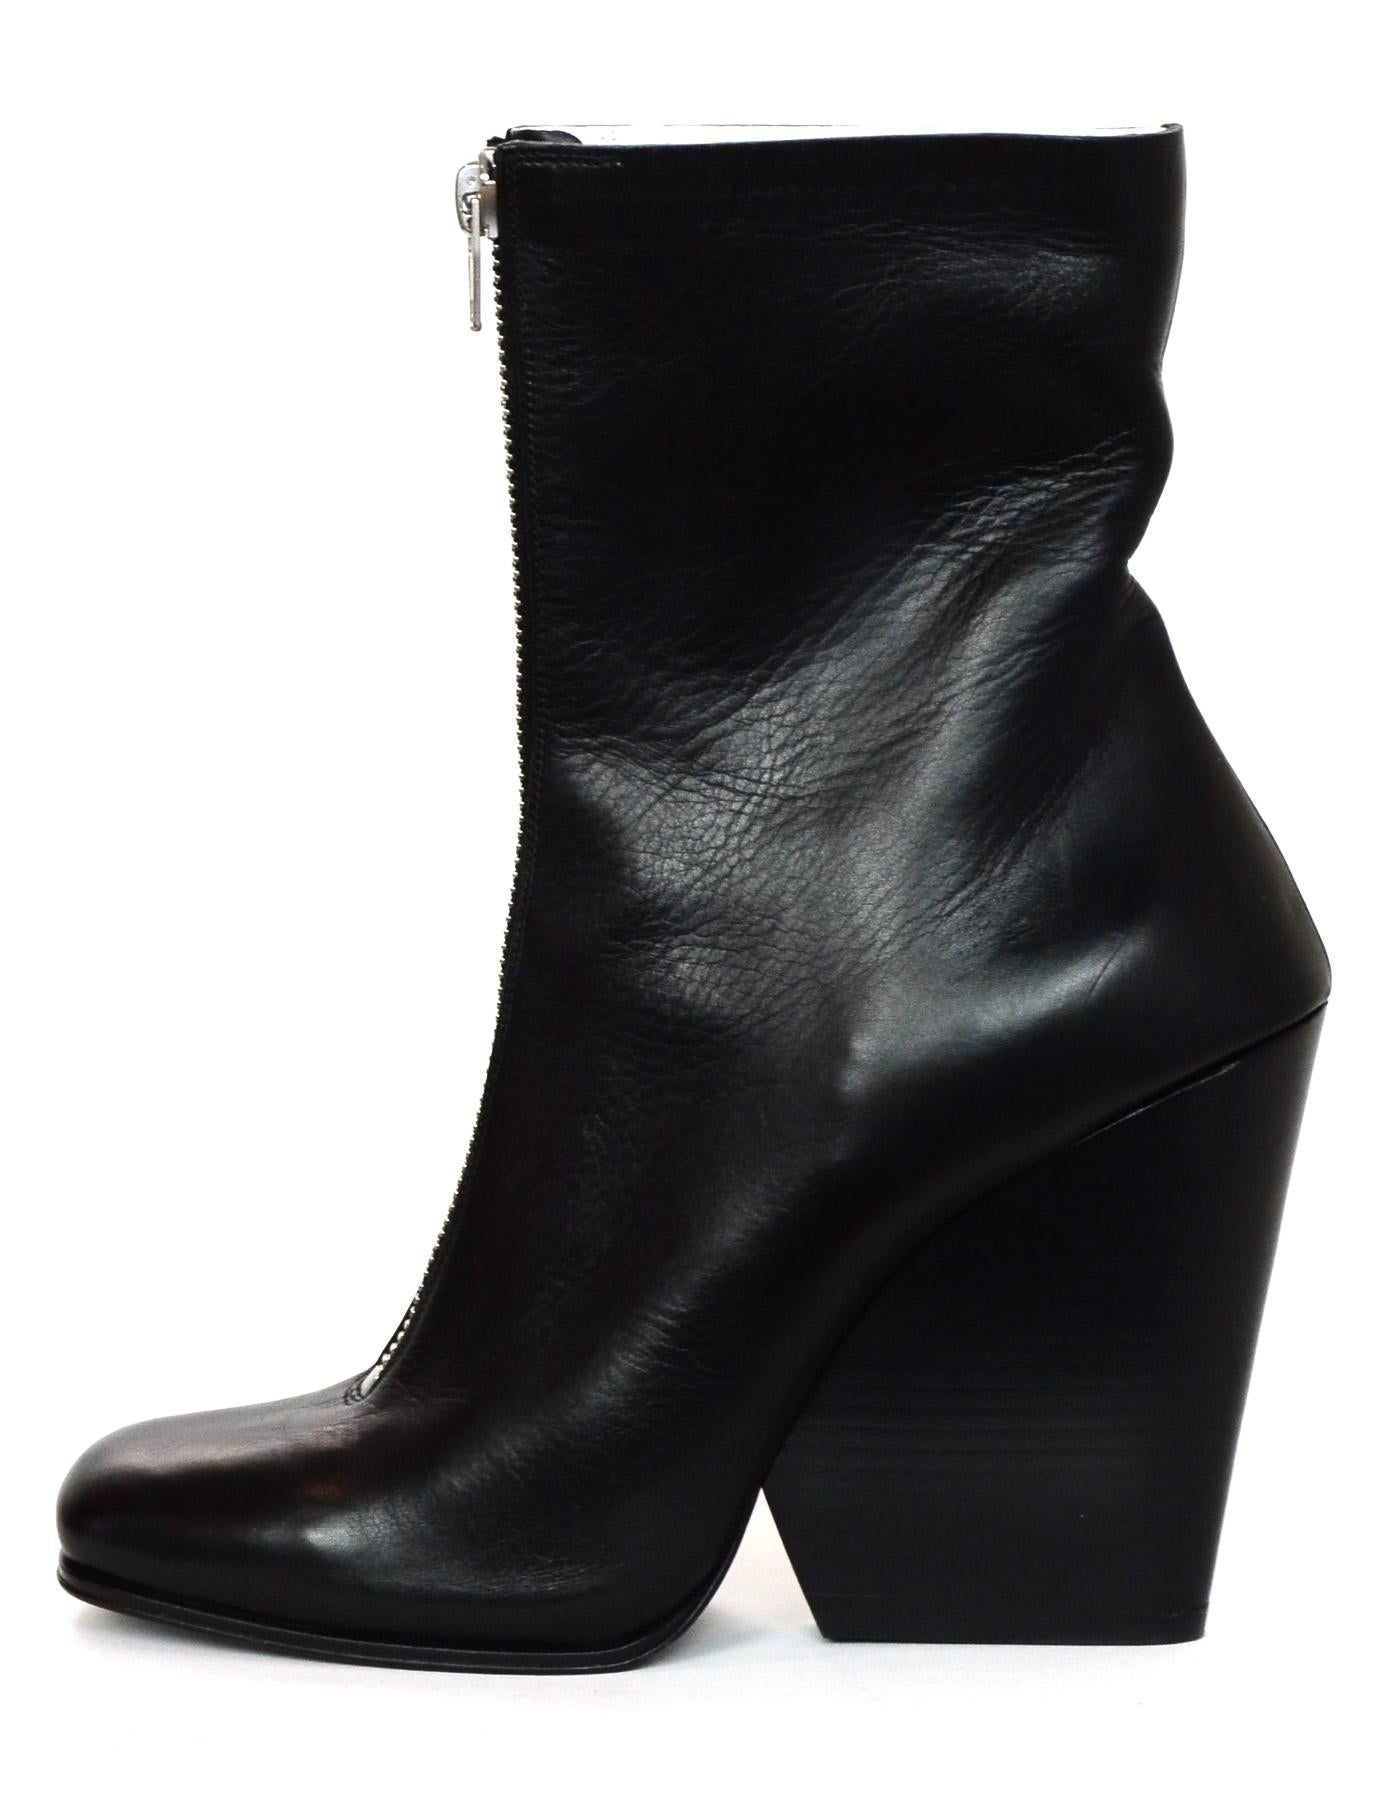 Celine Black Leather Front Zipper Wedge Boots Sz 40.5

Made In: Italy
Color: Black
Hardware: Silvertone
Materials: Leather
Closure/Opening: Front zipper opening
Overall Condition: Excellent pre-owned condition 
Estimated Retail: $1,200 +